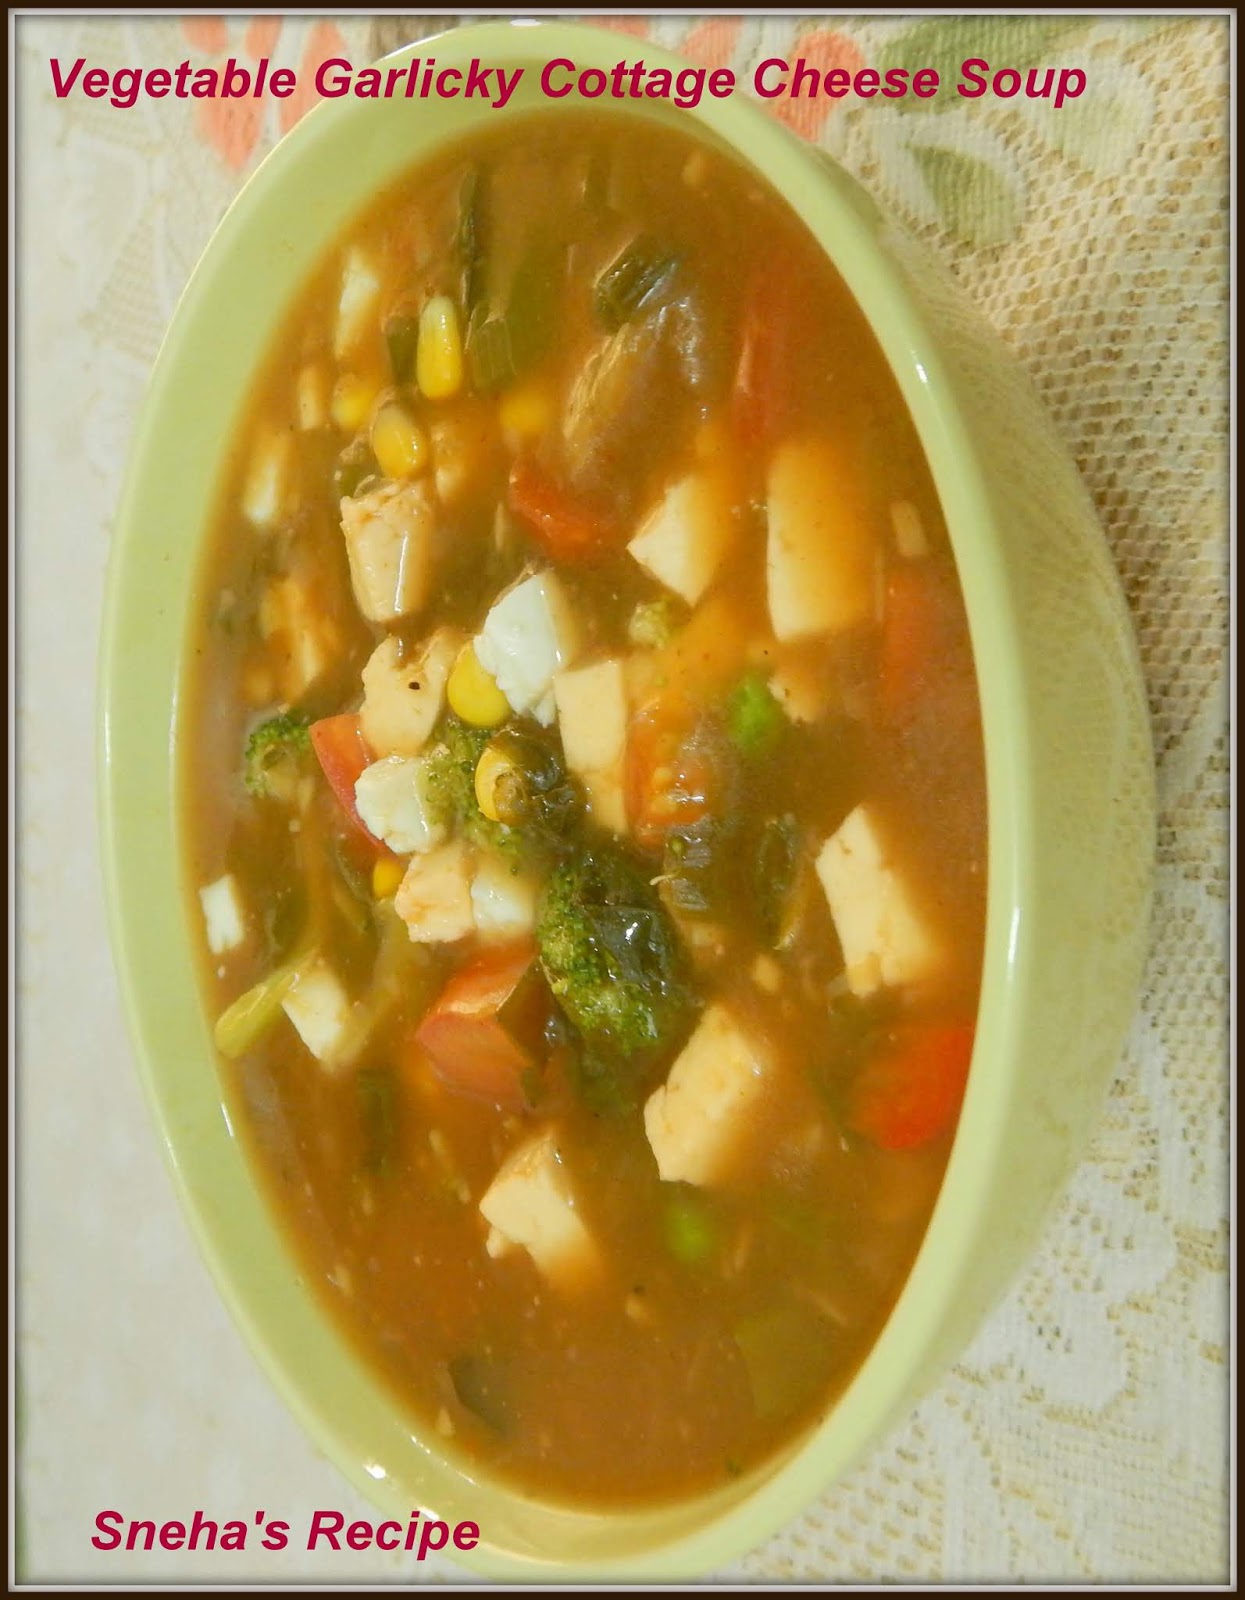 Vegetable Garlicky Cottage Cheese Soup#Soupswappers - Sneha's Recipe